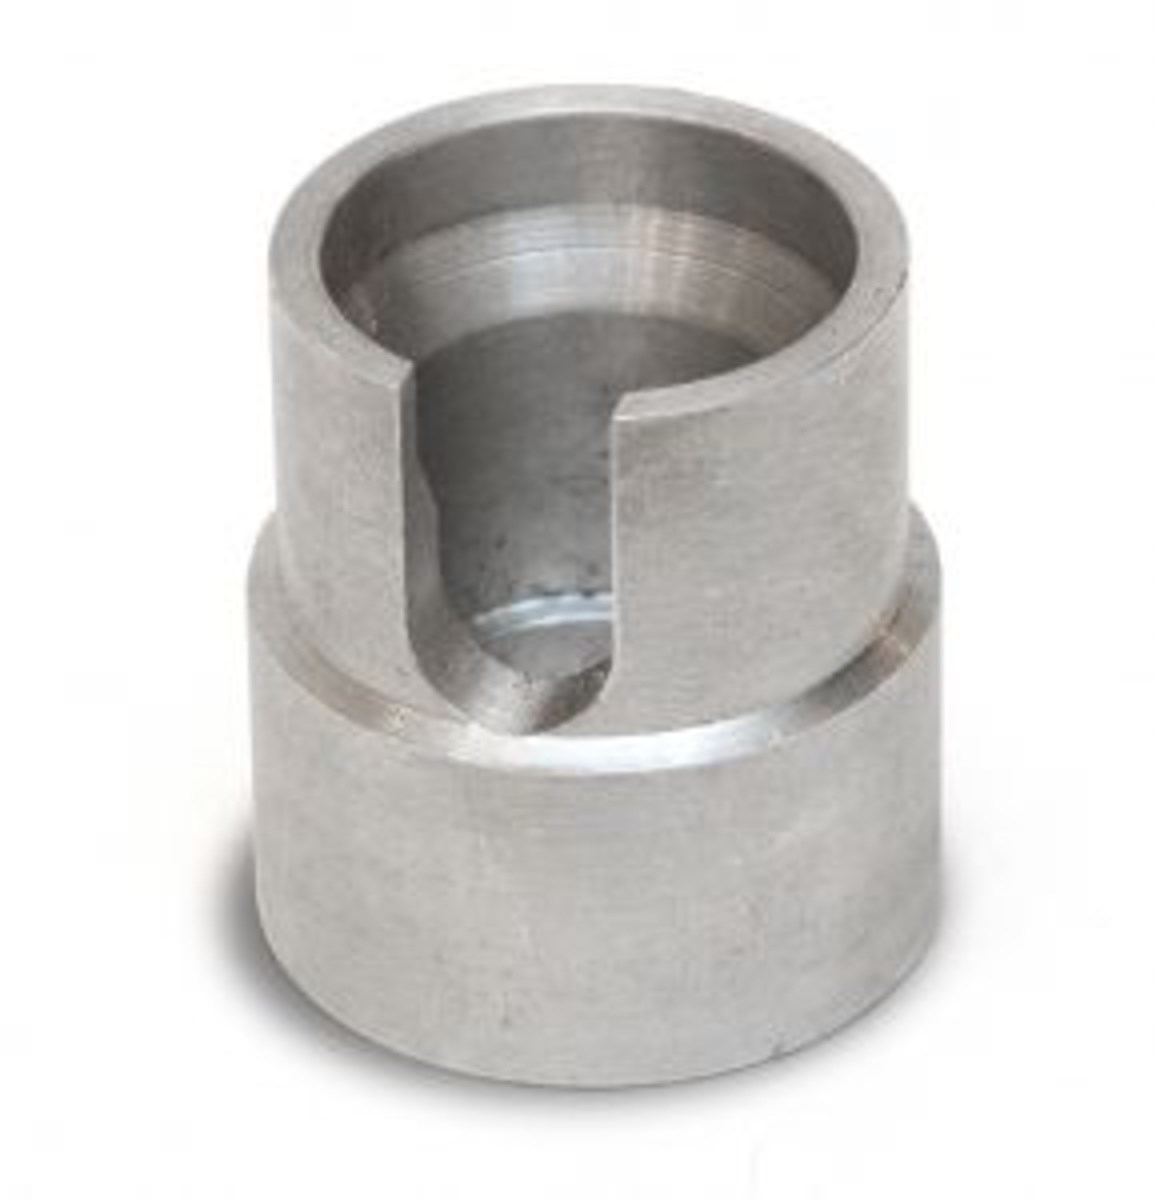 Kinetic Internal Chain Actuated Cone Cup - (x1) product image